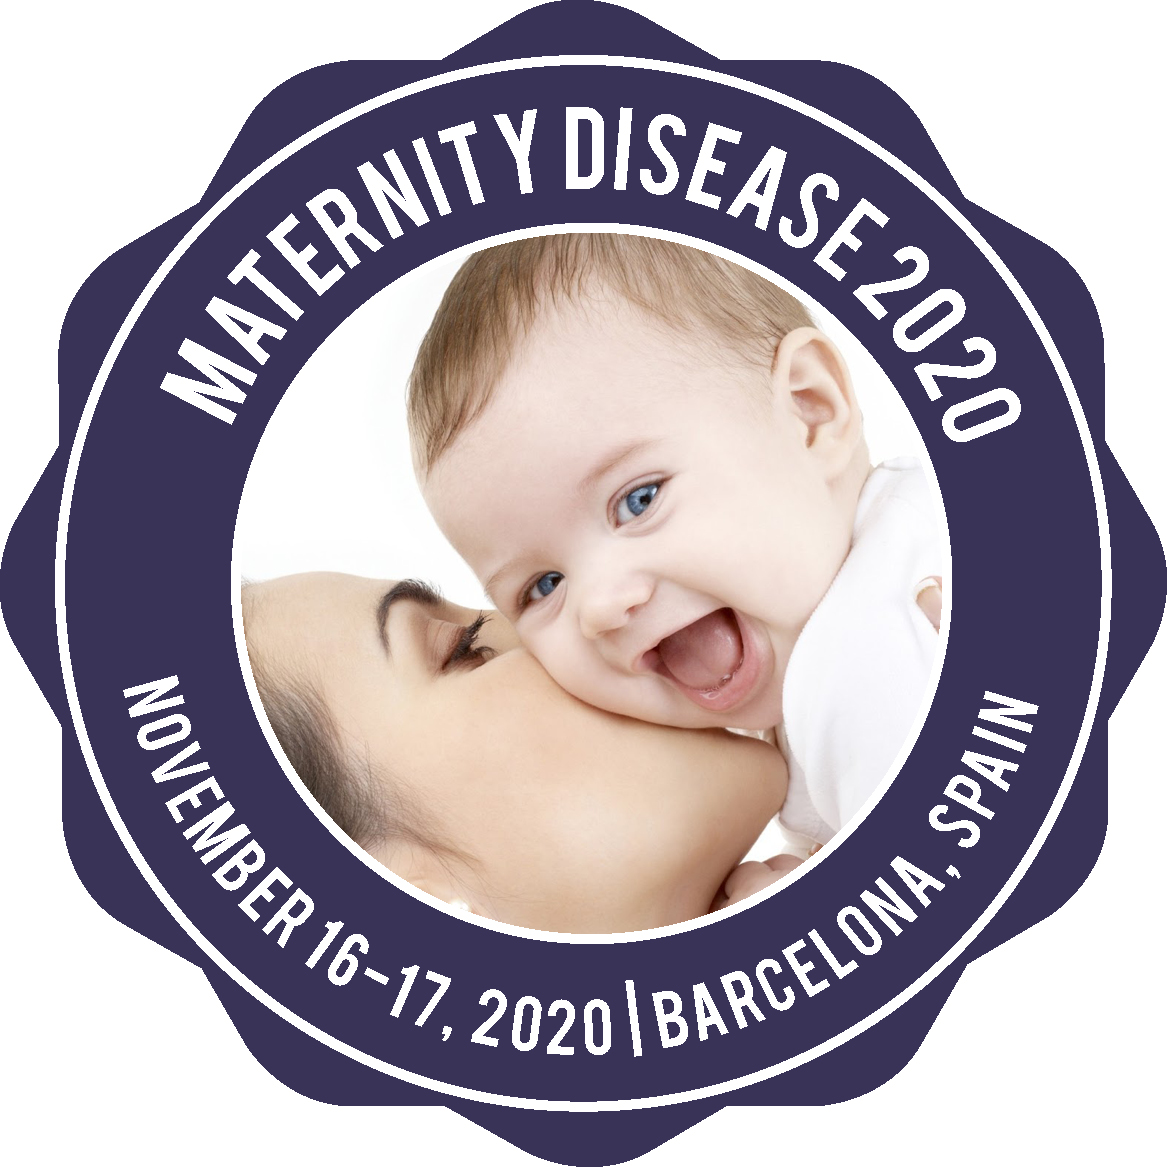 Annual Meet on Maternal & Infant Diseases and Medicine